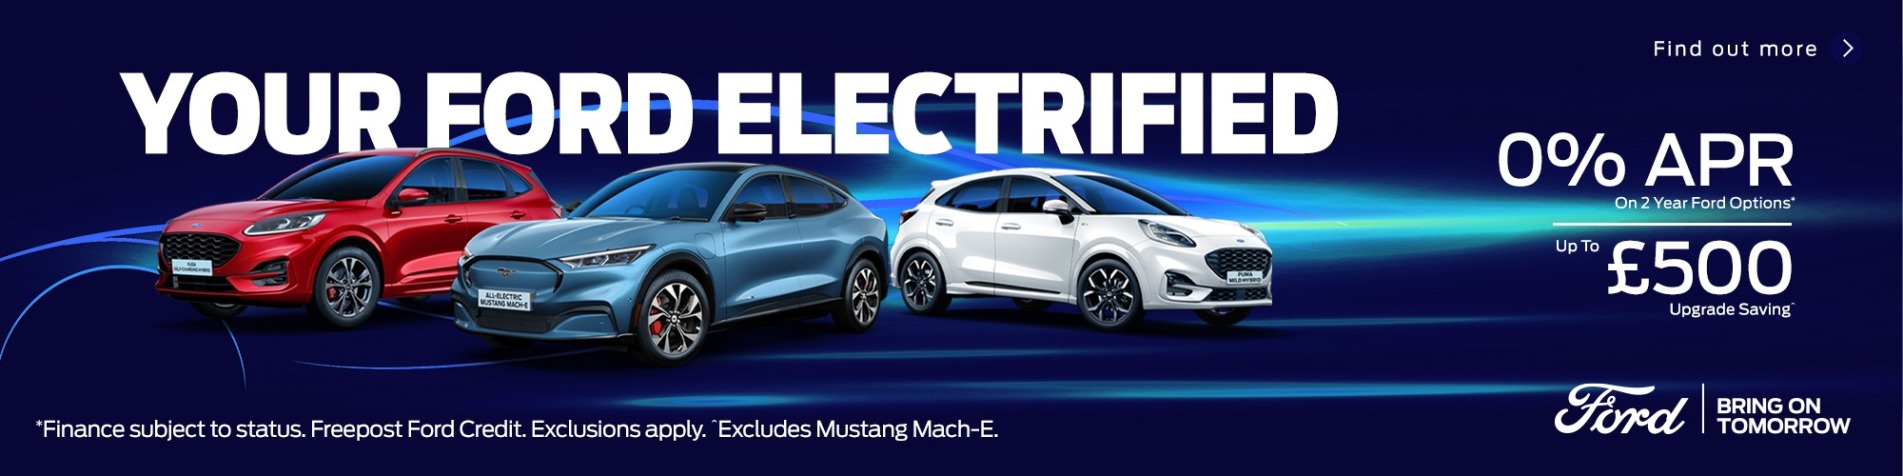 Q2 23 Your Ford Electrified Campaign Homepage Banners